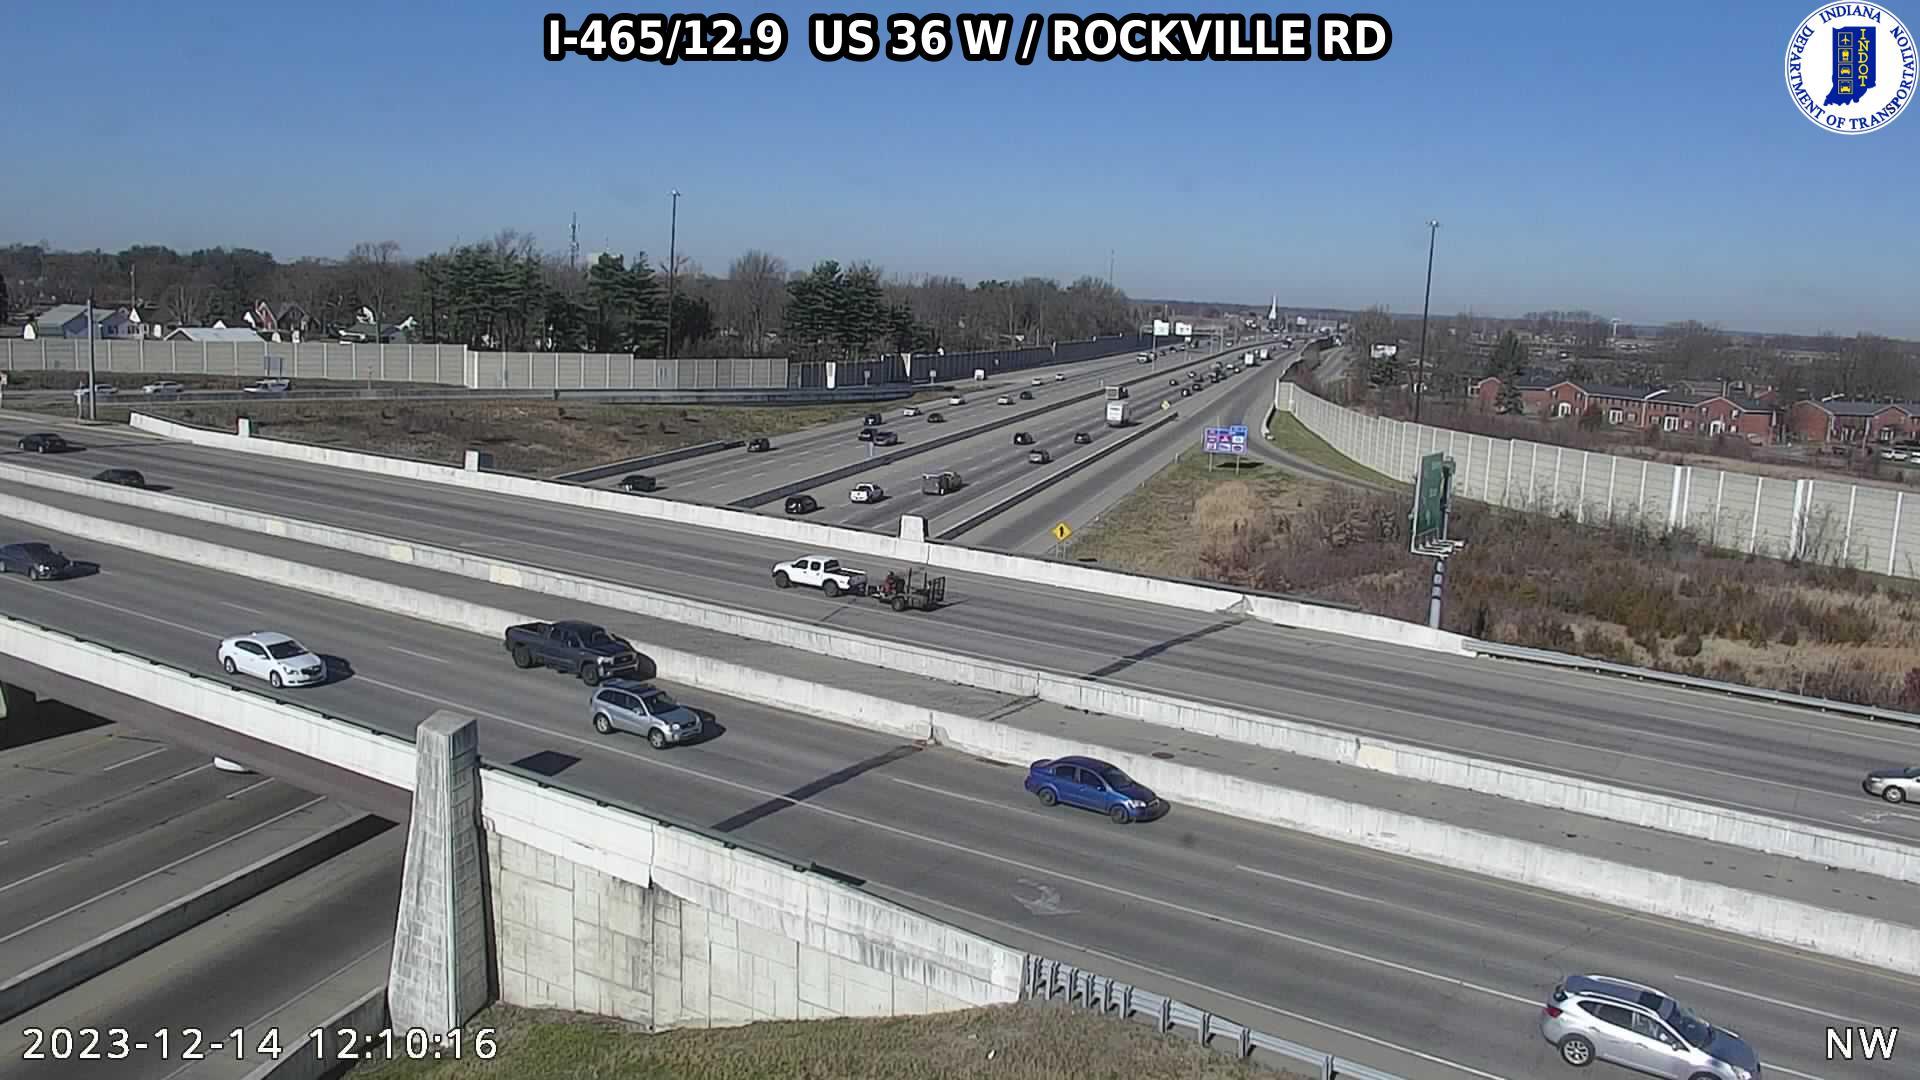 Traffic Cam Indianapolis: I-465: I-465/12.9 US 36 W - ROCKVILLE RD Player